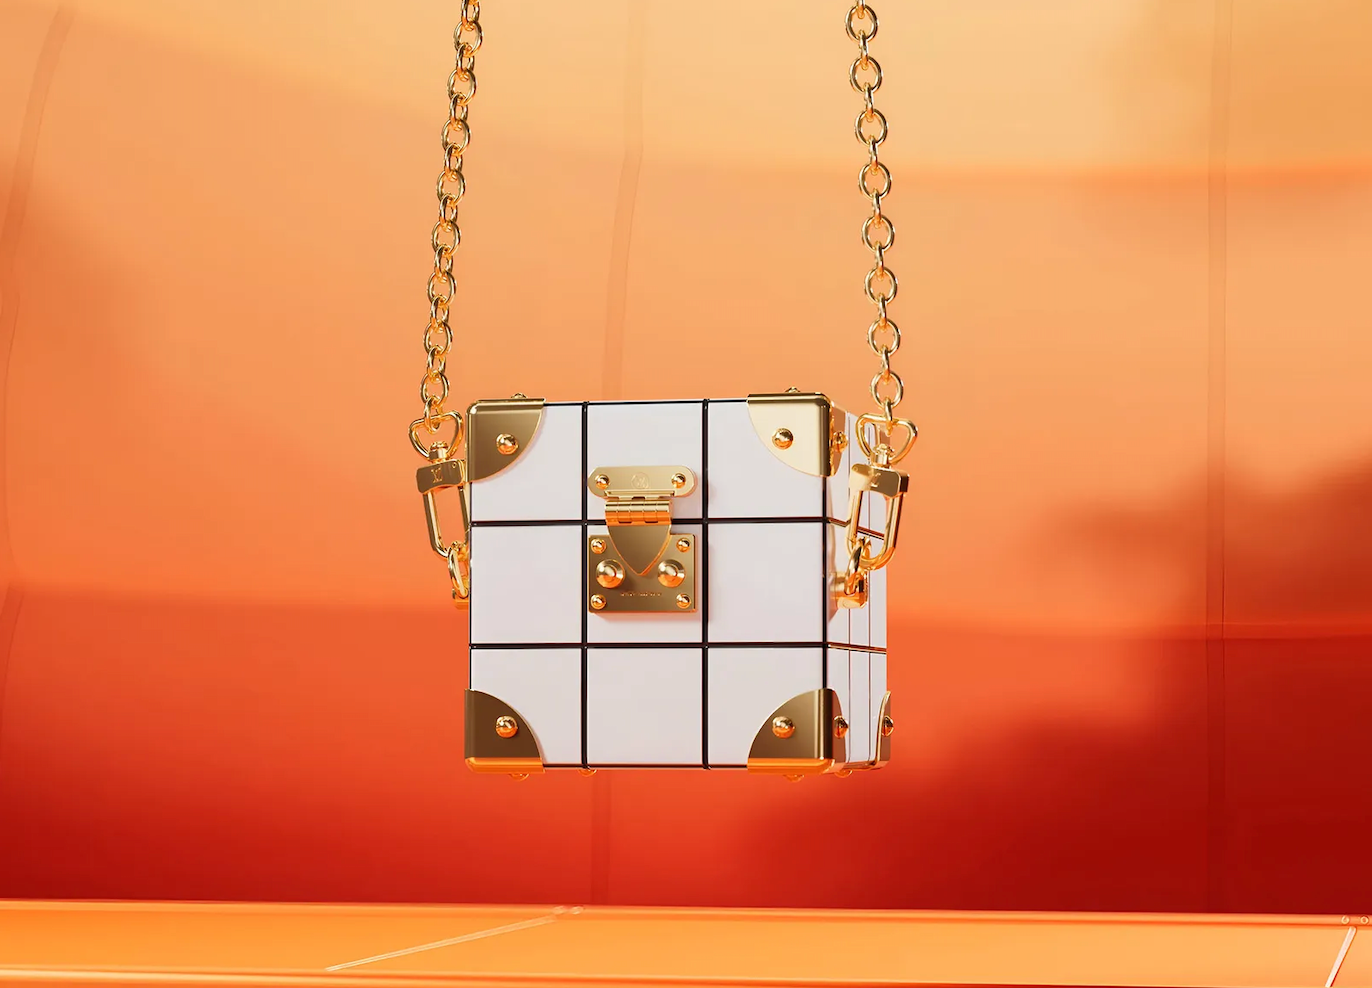 Following its Speedy 40 and Treasure Trunk NFT drops earlier this year, the French fashion house is back with another phygital release for the high-end Web3 community. Photo: Louis Vuitton